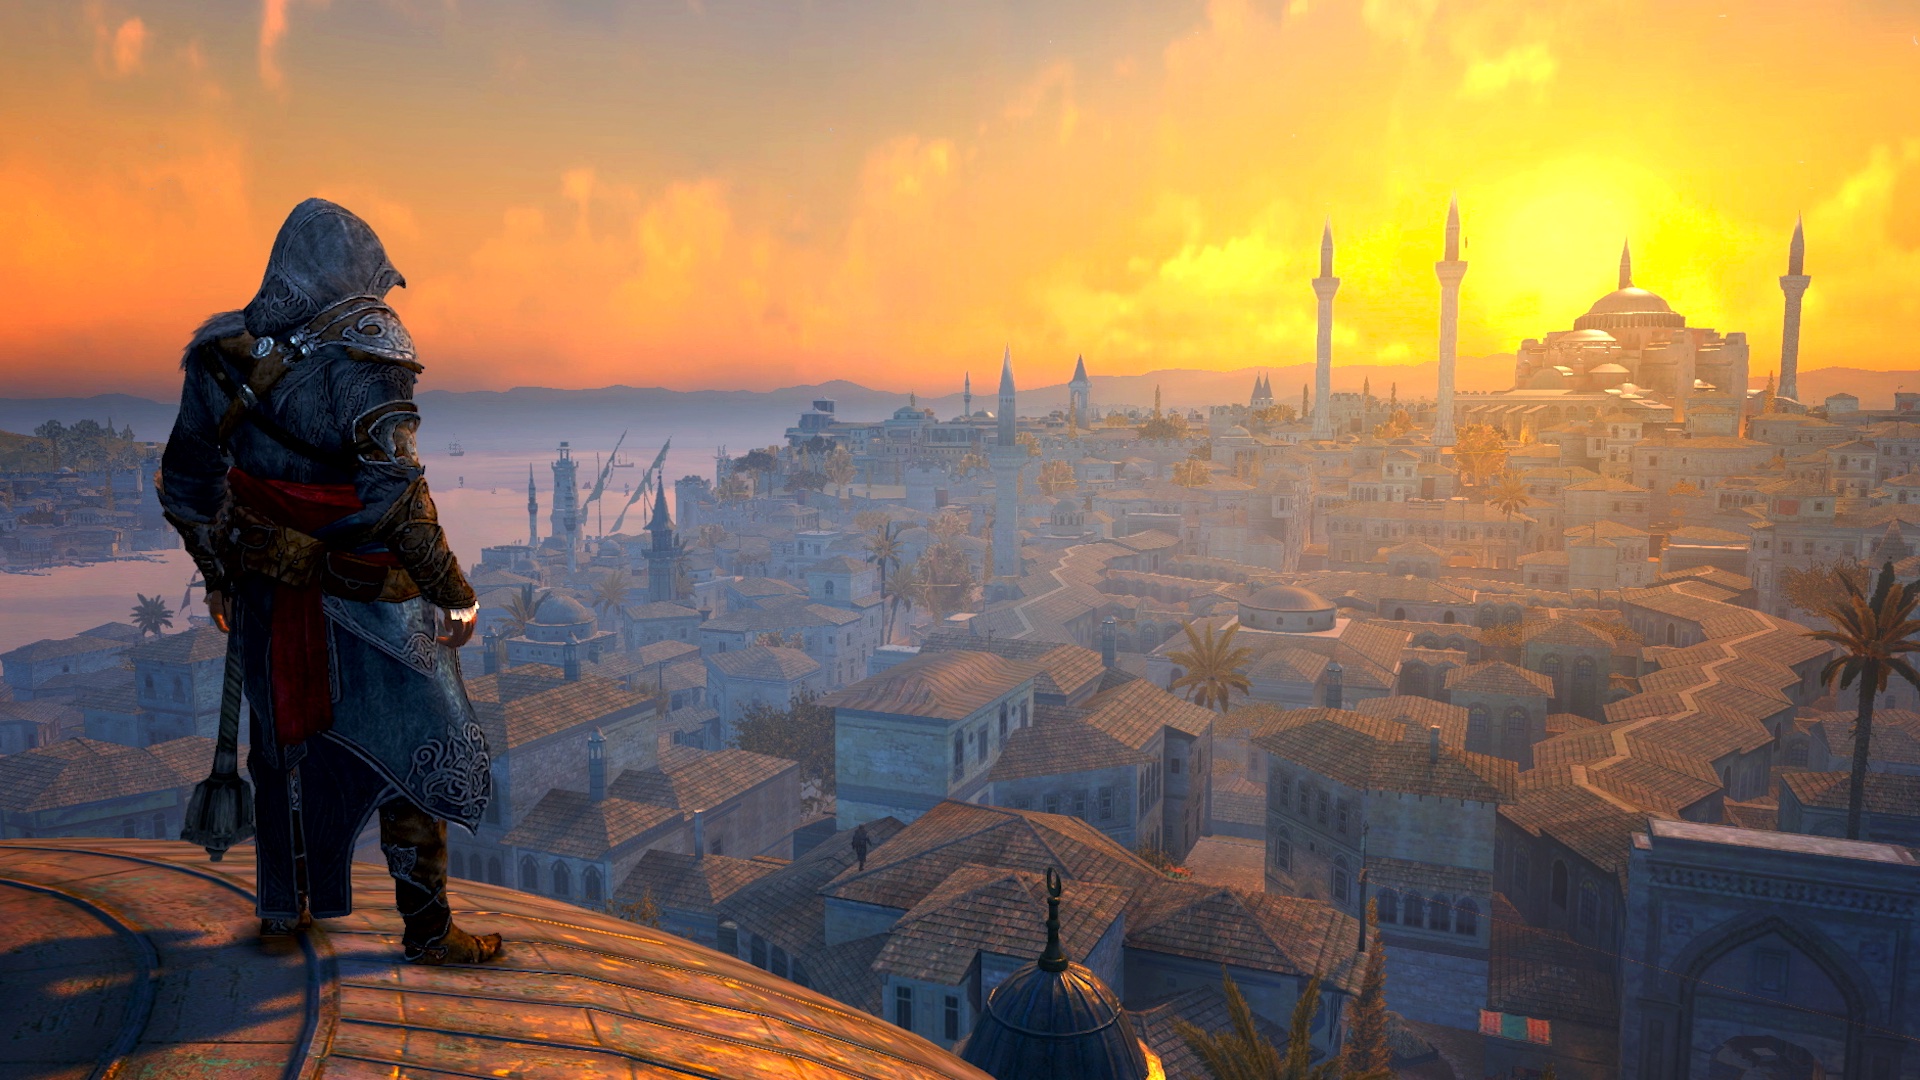 Ezio overlooks a city under sunset in a screenshot from Assassin’s Creed: The Ezio Collection for Nintendo Switch